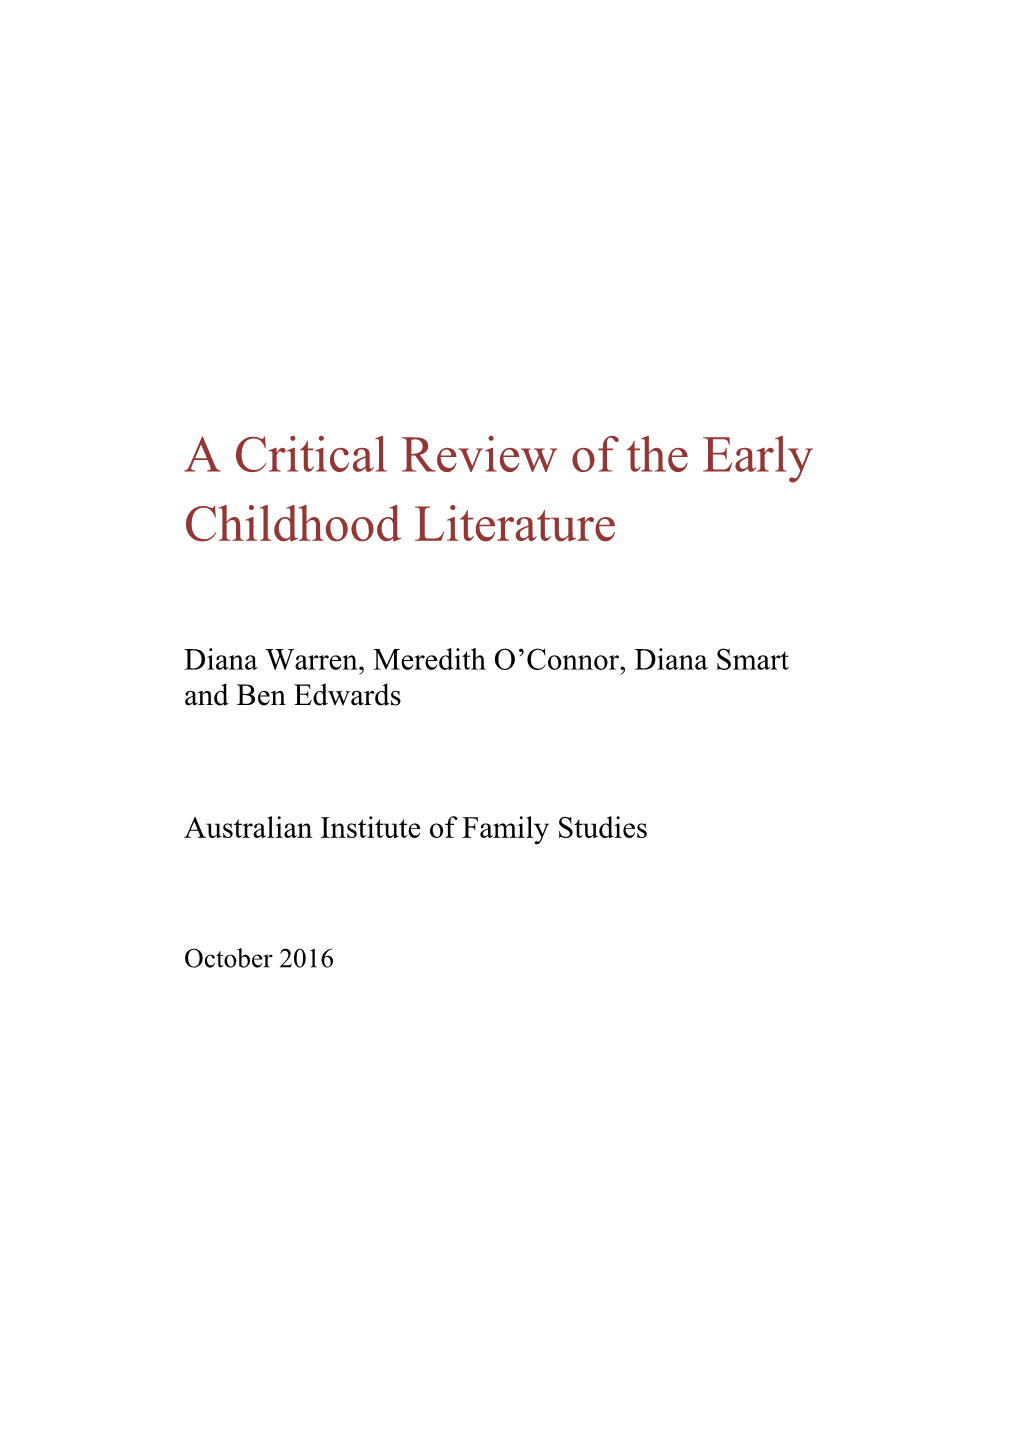 A Critical Review of the Early